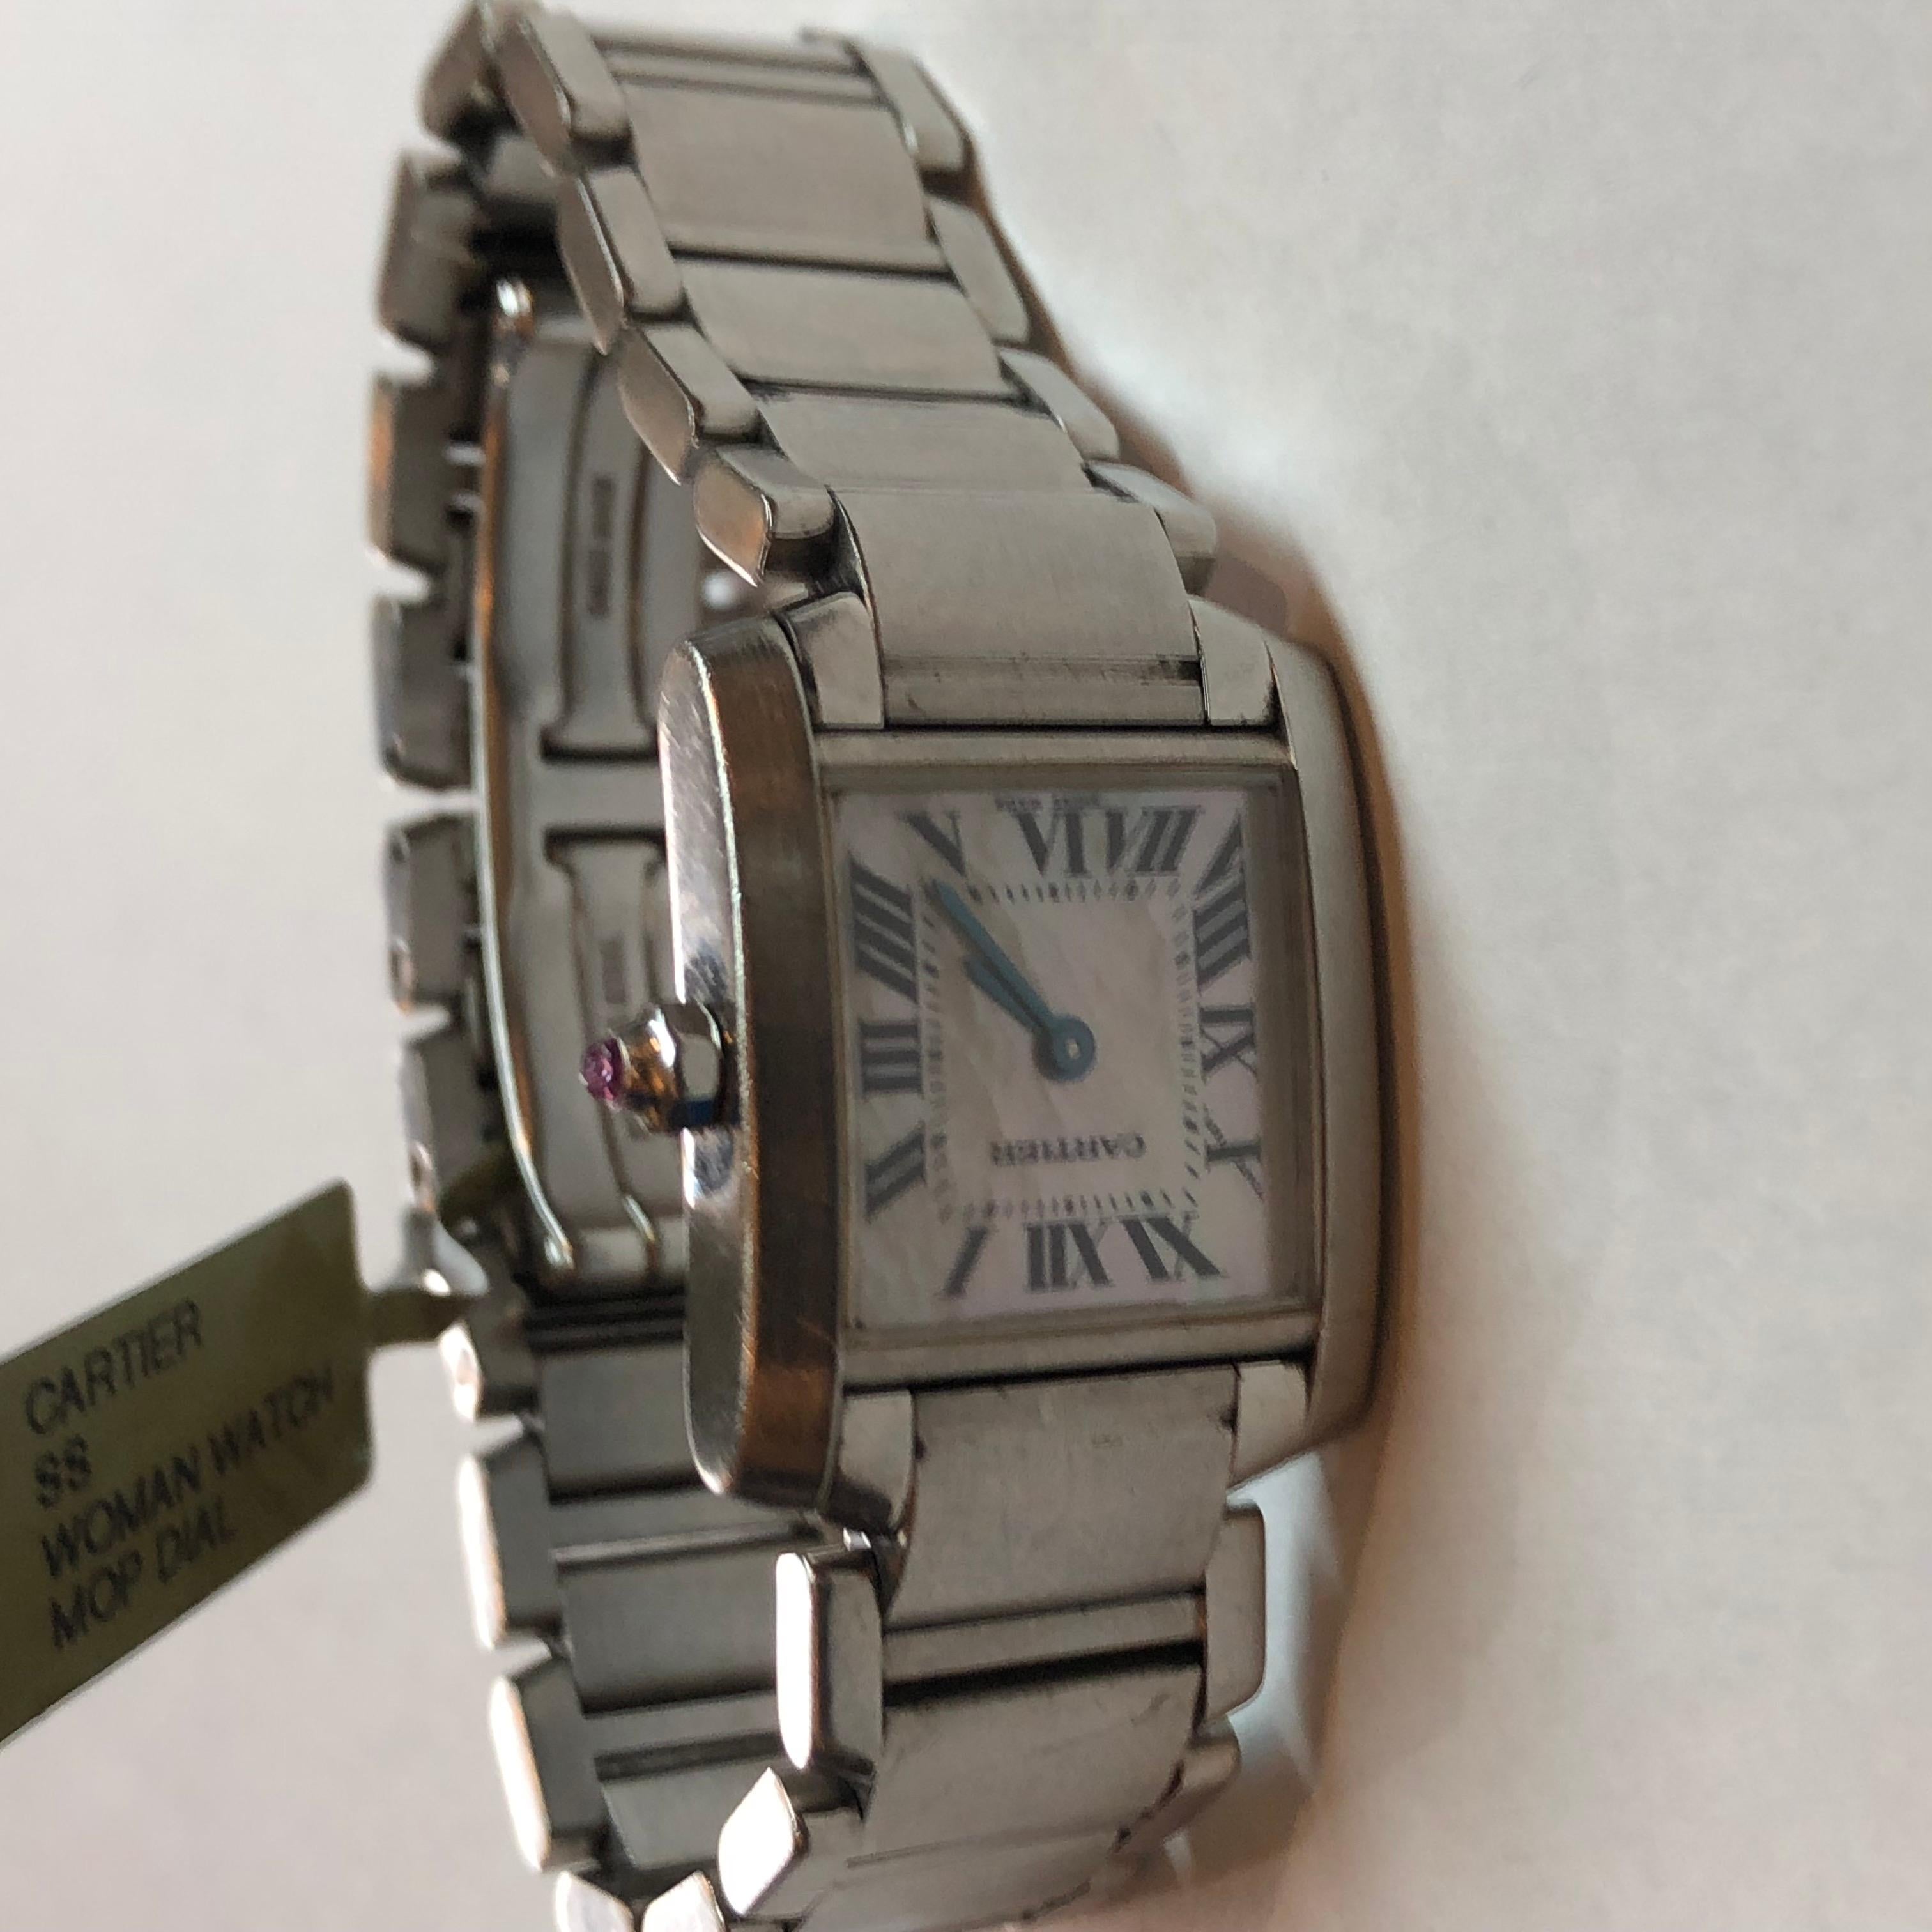 Cartier Tank Francaise Ladies Watch 
Pink Mother of Pearl Dial 
Sapphire Crystal
Stainless Steel
Small size 20mm by 25mm
Full Links
In Original Box no Papers
Reference Number 2384